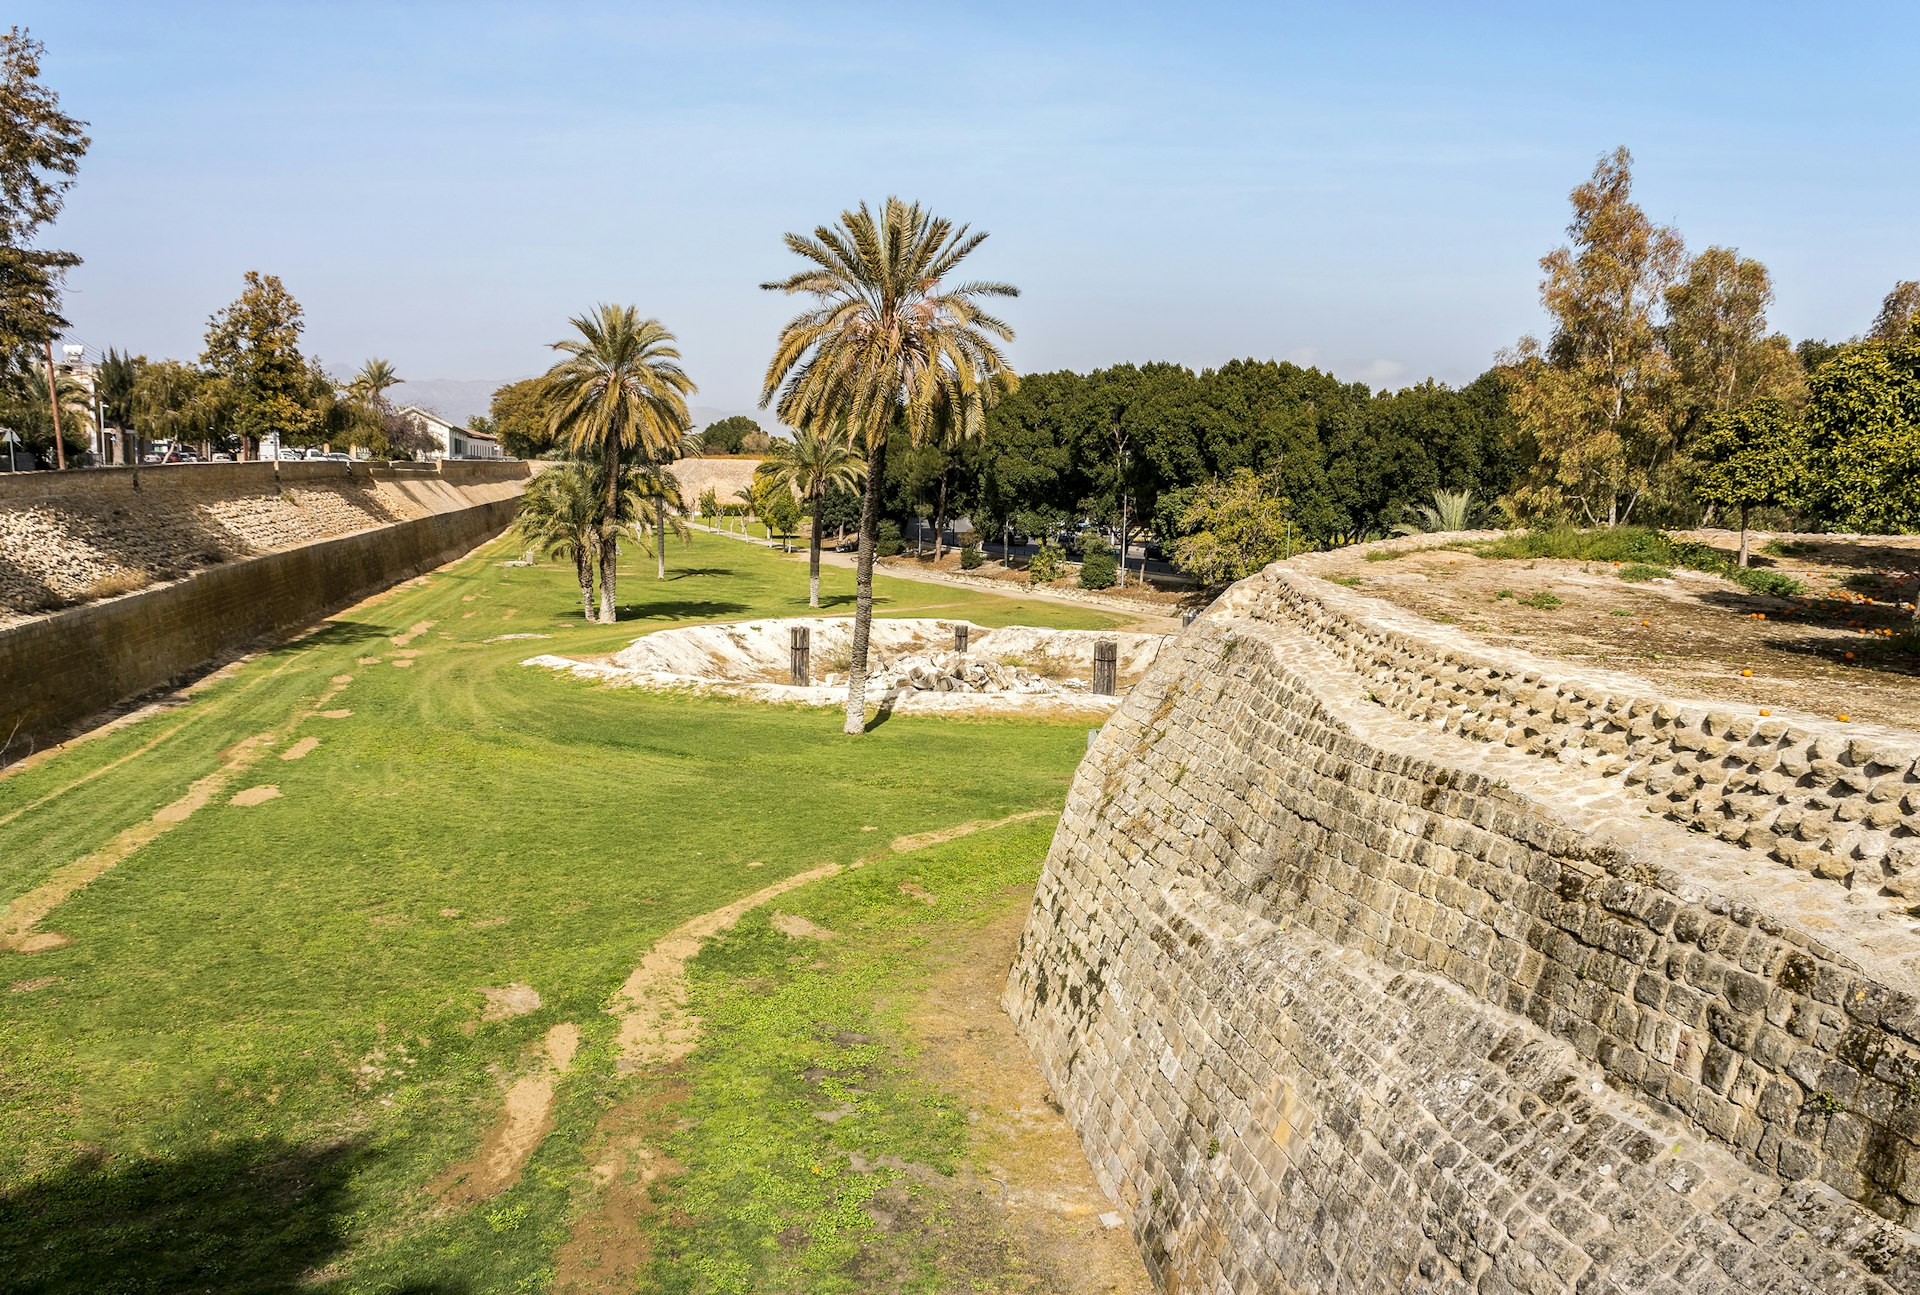 The 16th century Venetian walls of Nicosia, Cyprus, on the right and green grass on the left